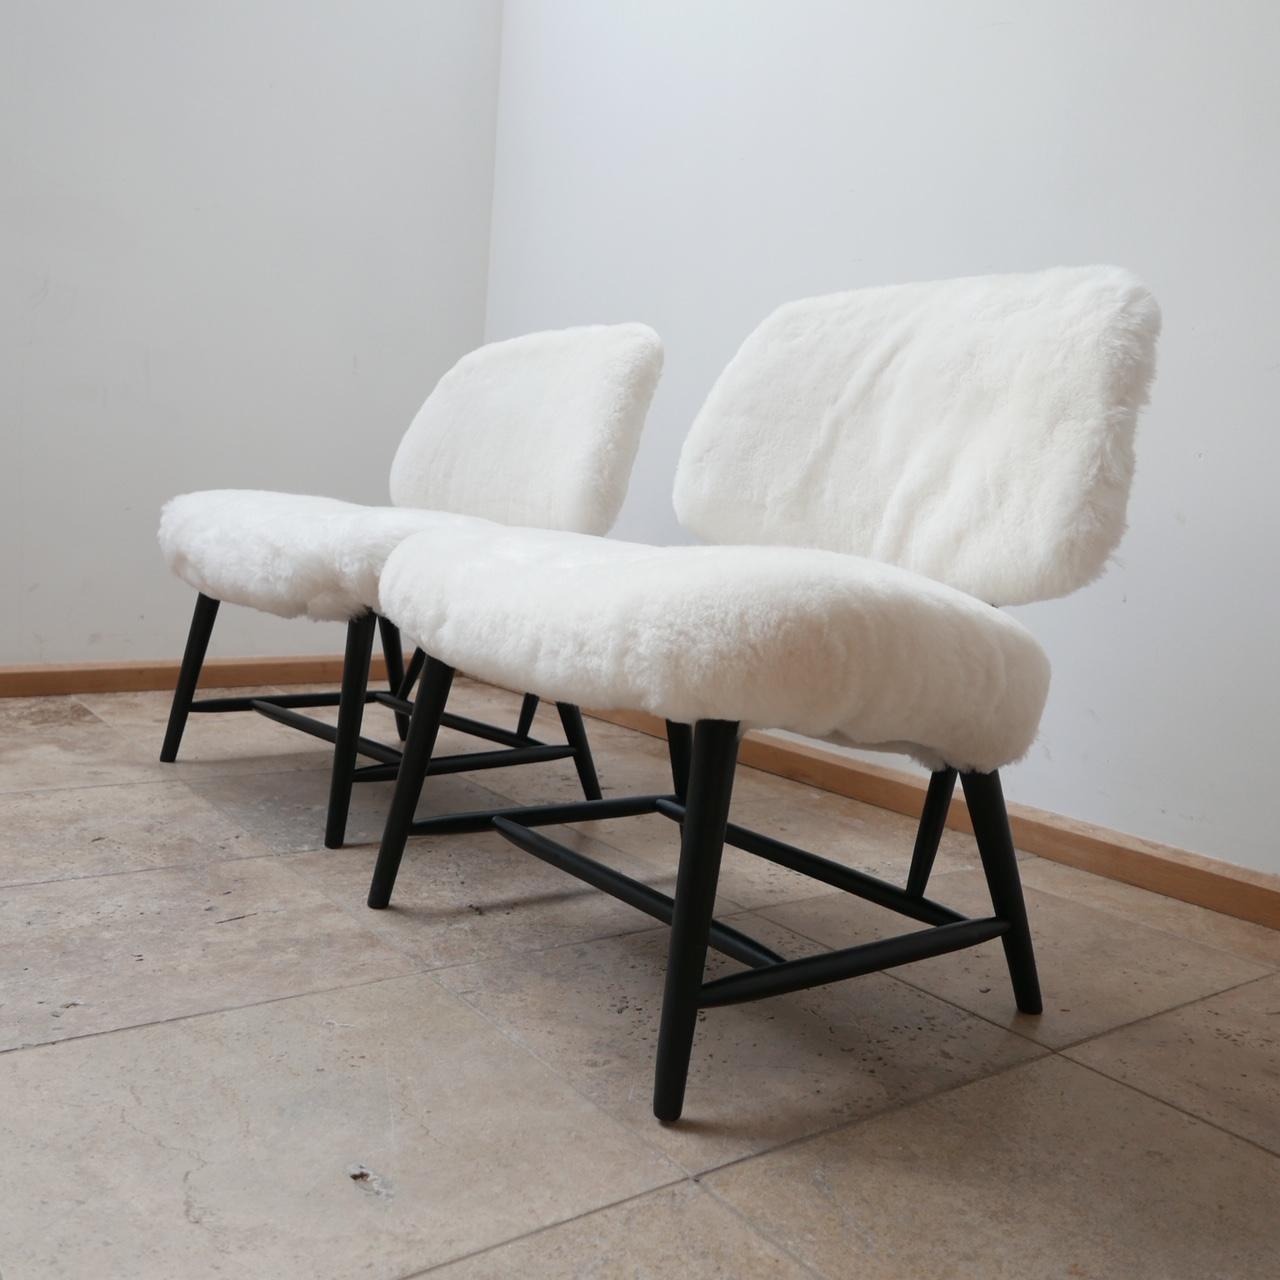 A lounge chair by Alf Svensson. 

'TeVE' model for Studio Ljungs Industrier AB Malmö.

Sweden, c1950s. 

Blackended/stained Beech wood, brass parts, re-upholstered in white sheepskin. 

Perfect for a living room or bedroom.

Dimensions: 65